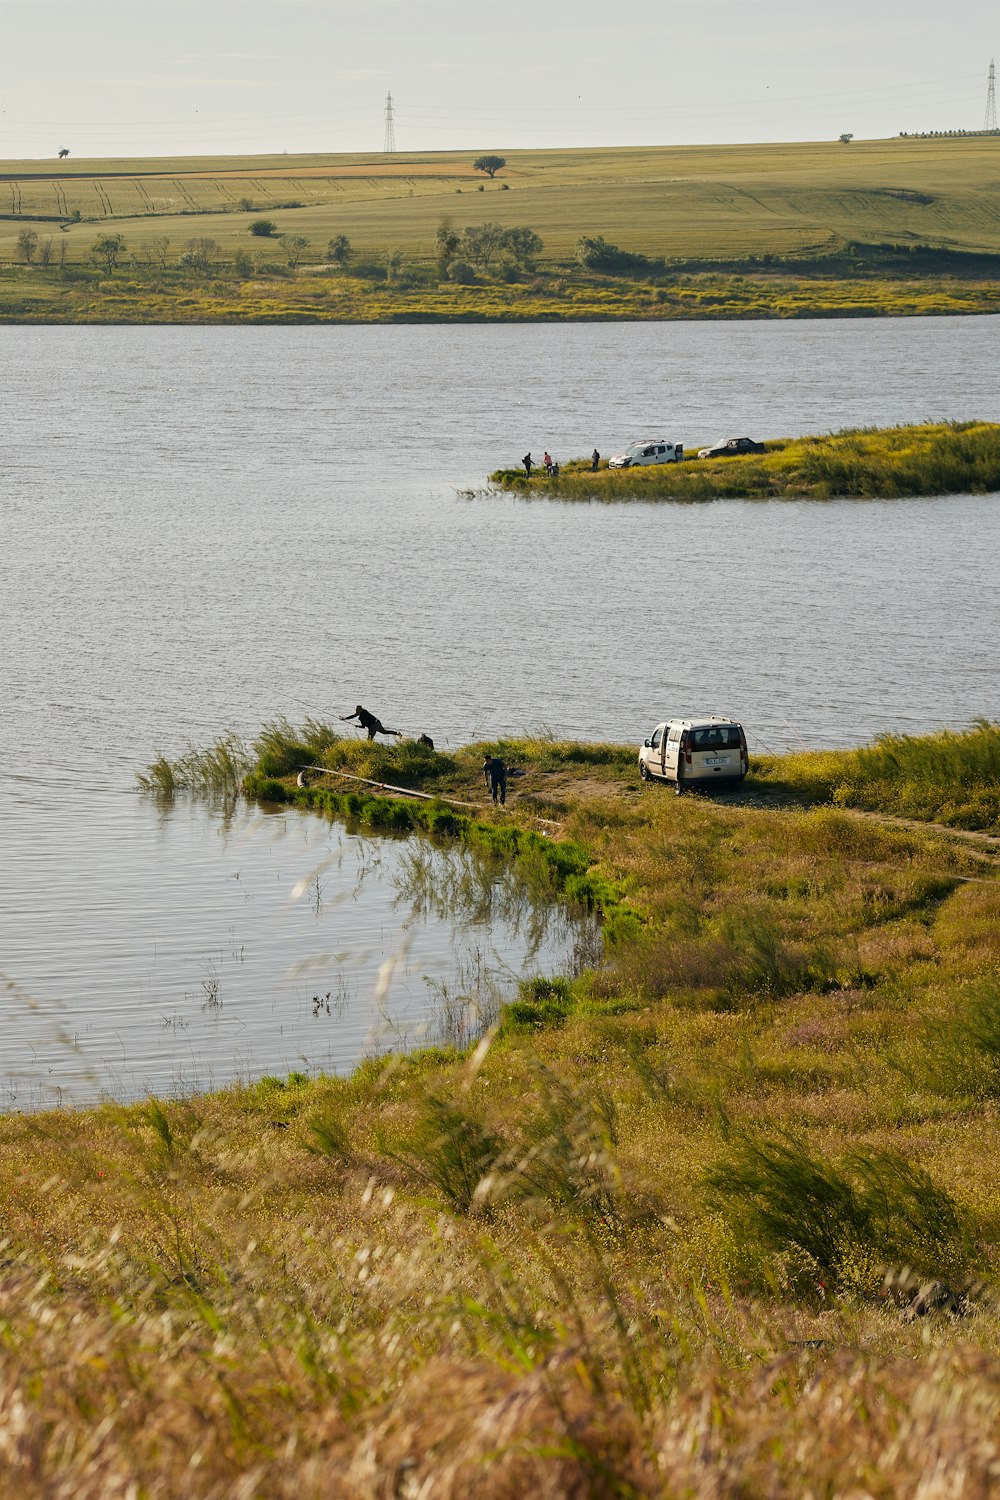 a van is parked on the shore of a lake